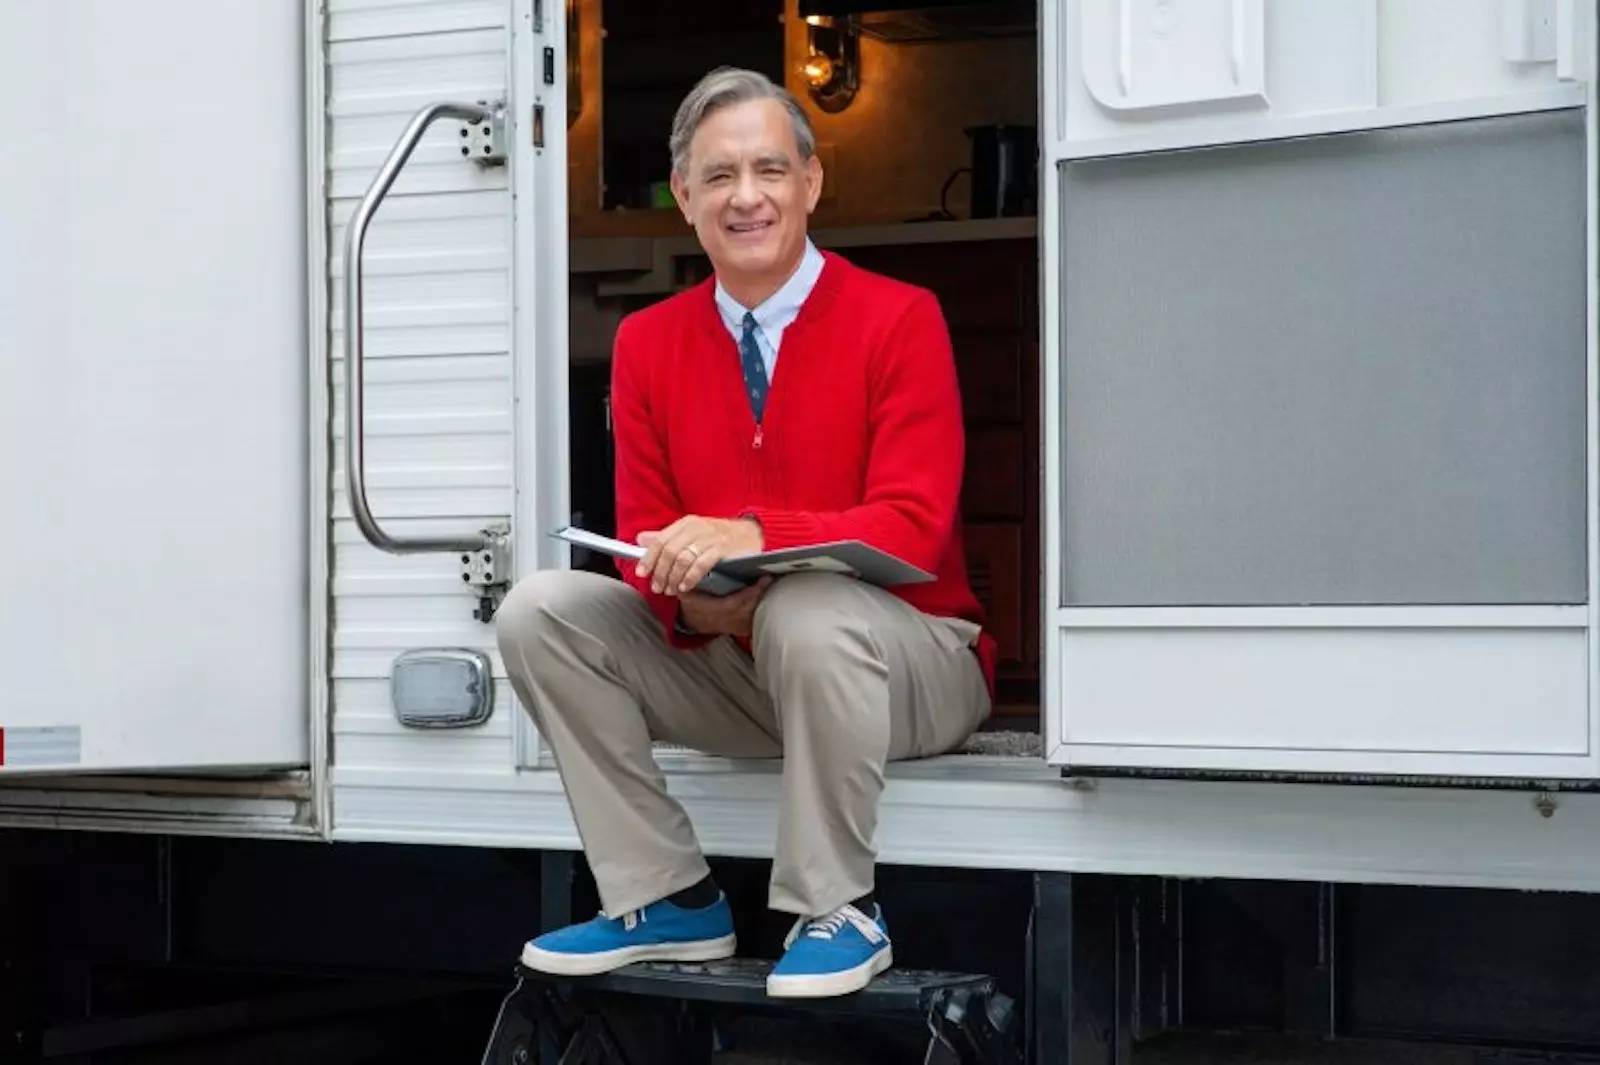 My Mister Rogers: Catching up with writer Tom Junod